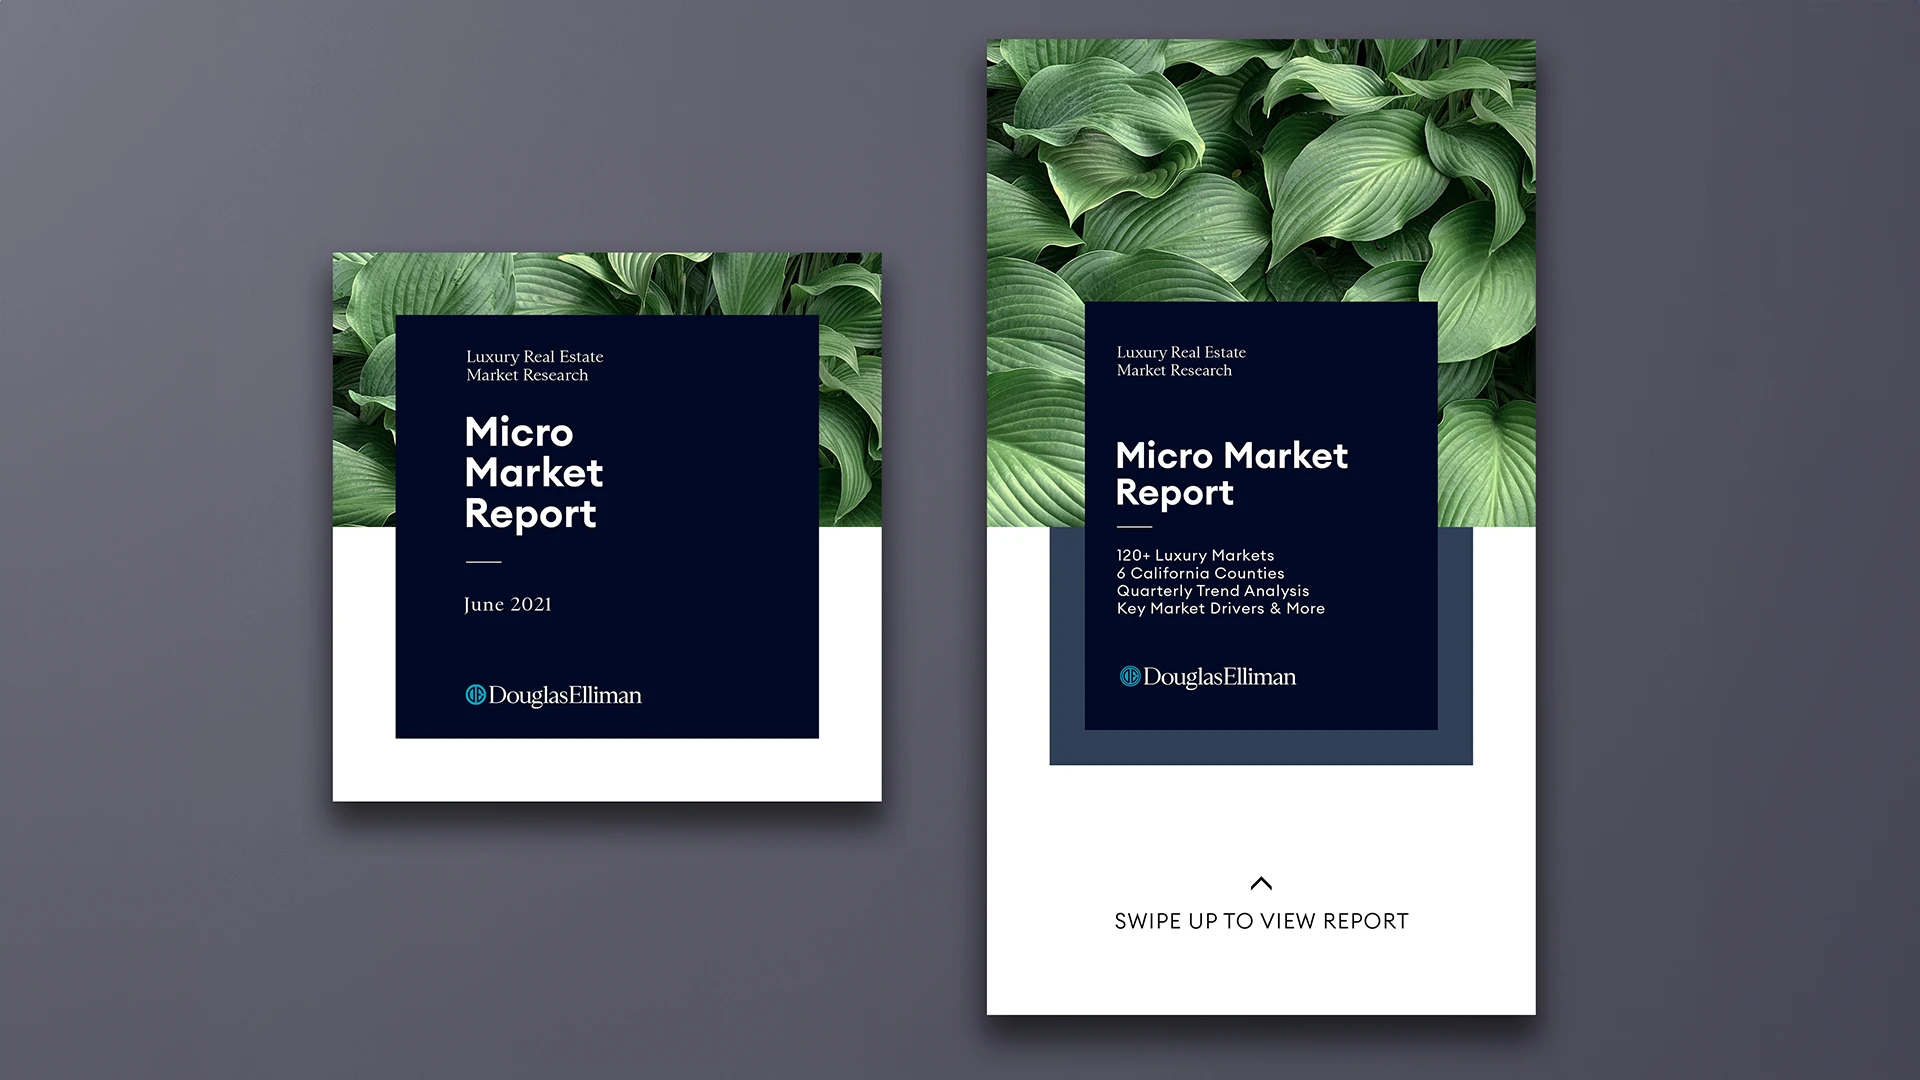 The social post and social story images which accompany the Micro Market Reports in the design iteration that existed from 2020 through mid-2023. This image shows the graphics matching the texture utilized in the current month's report.